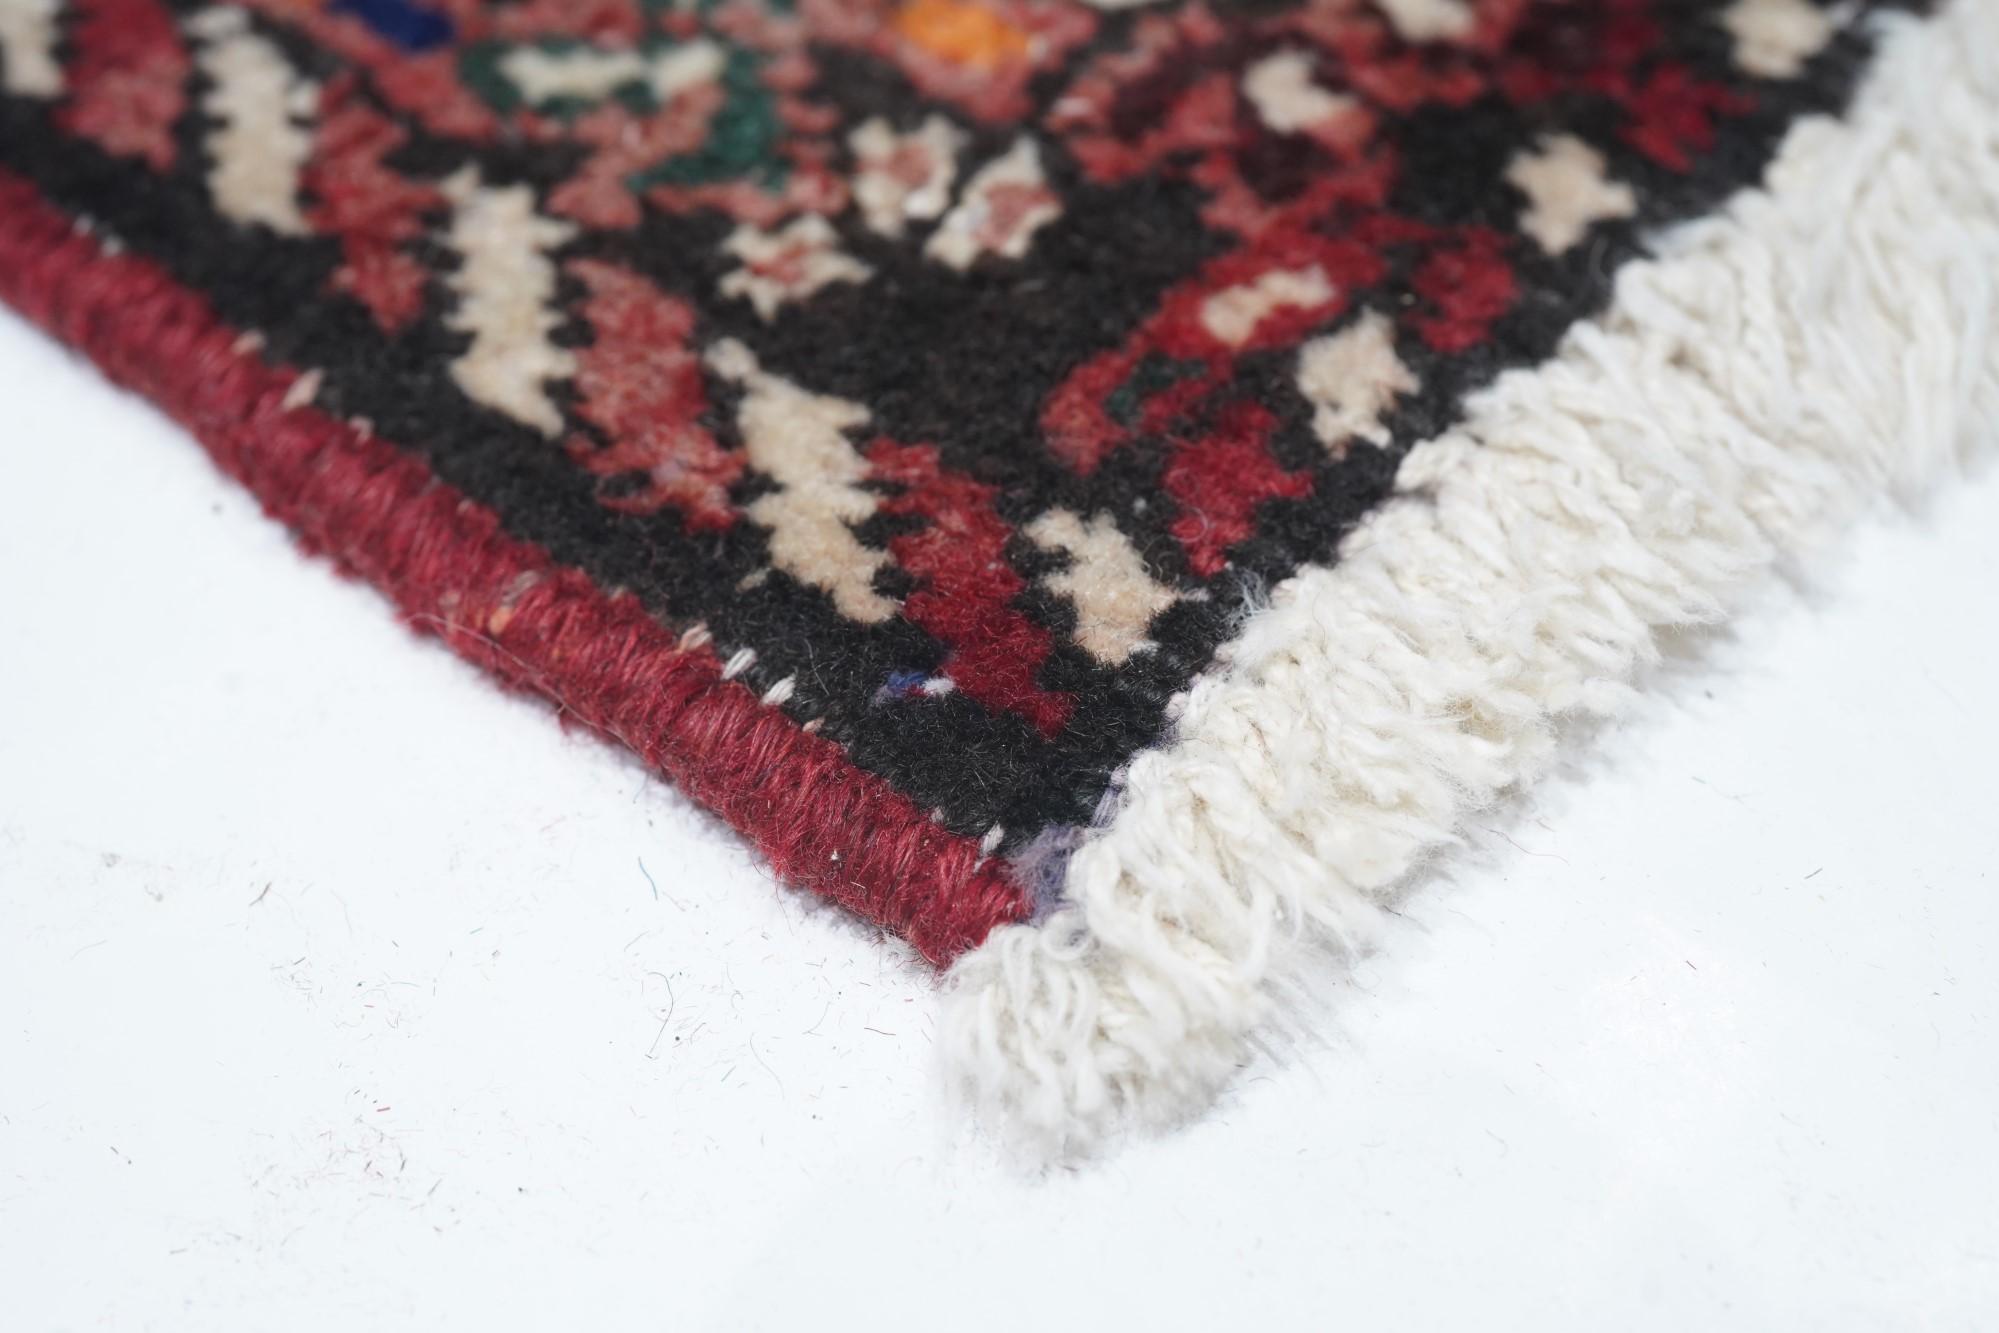 Vintage Qashqai Rug In Good Condition For Sale In New York, NY